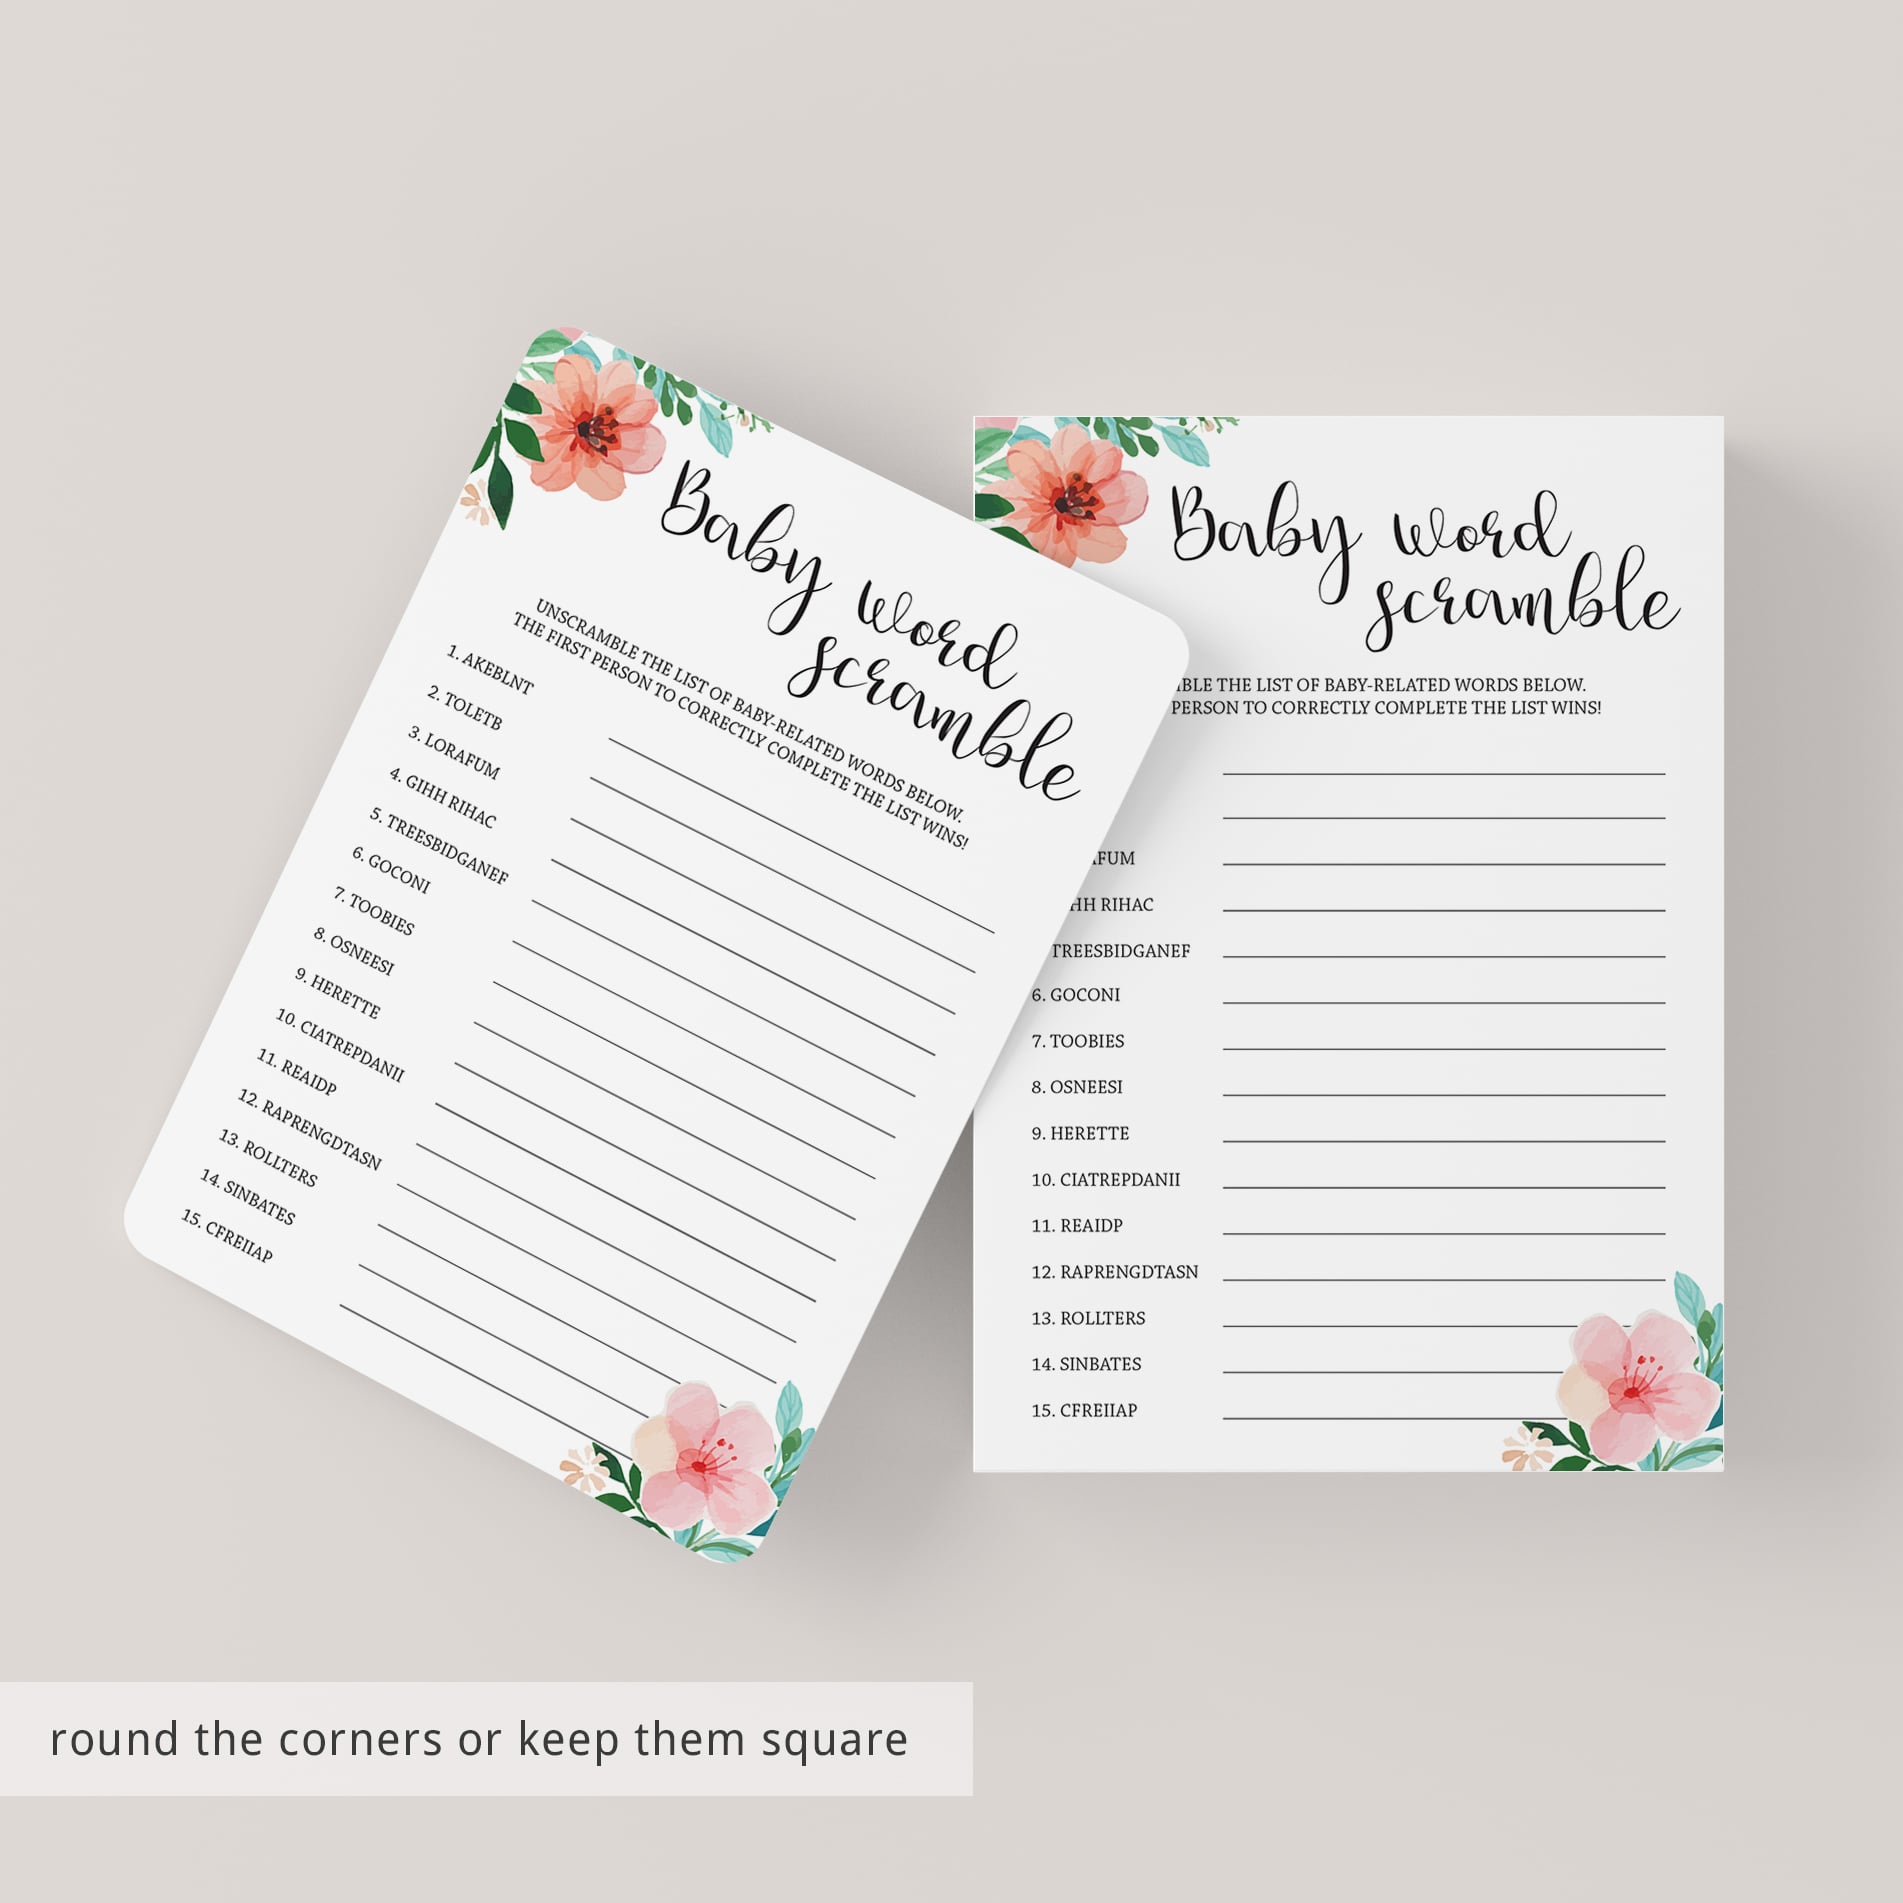 Word scramble for baby shower girl by LittleSizzle